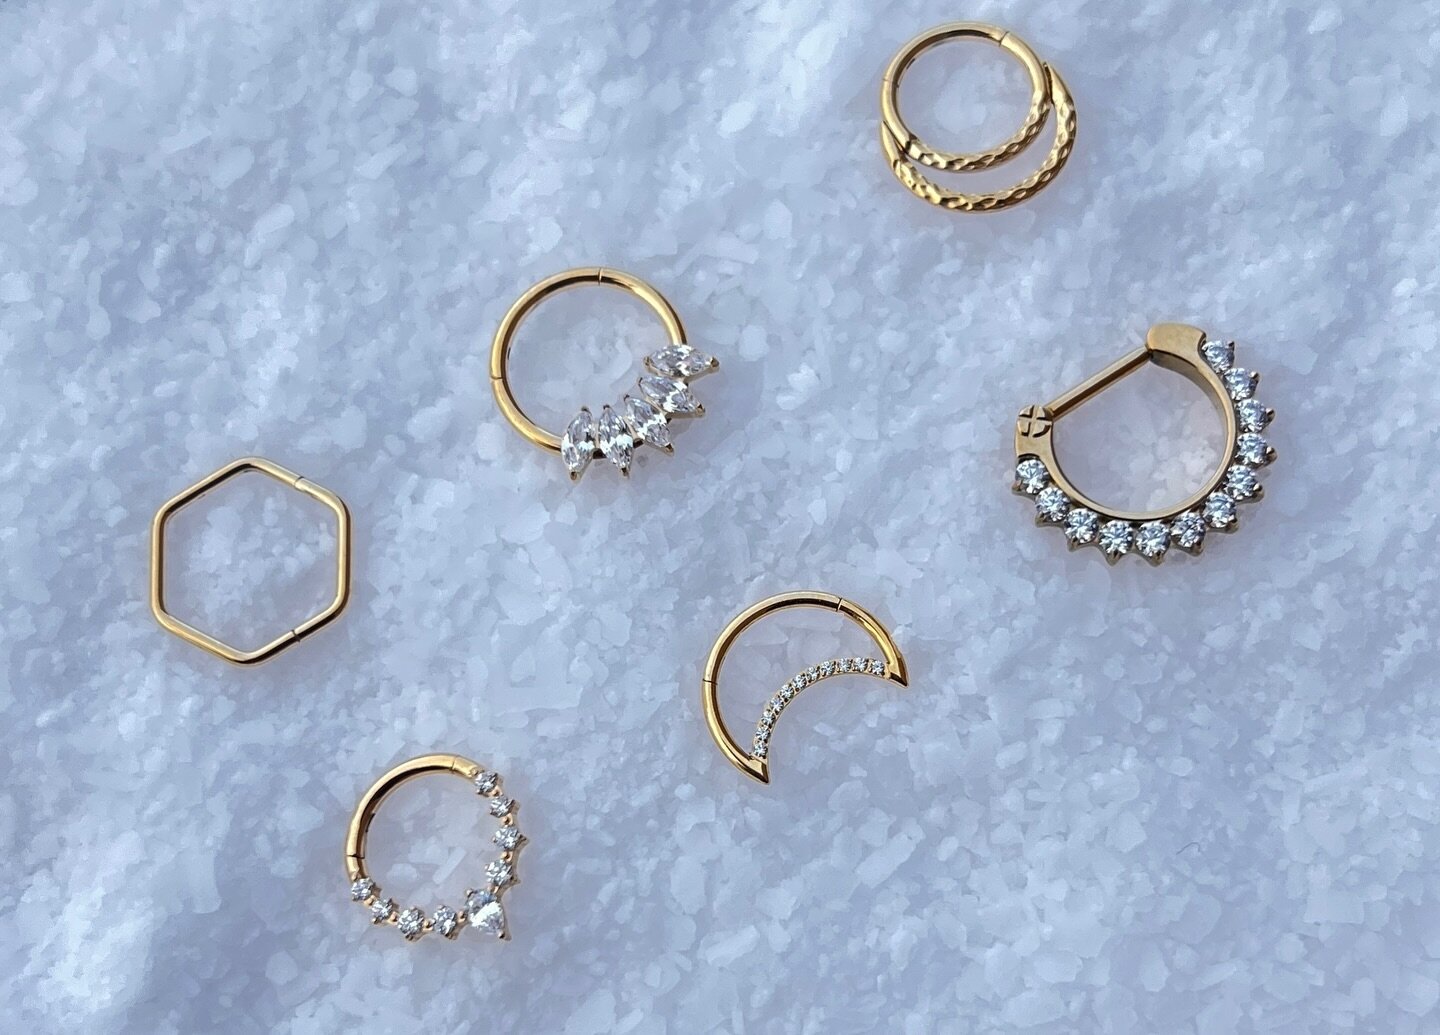 24kt Clickers ✨ Perfect for a healed Septum or Daith. 

We&rsquo;re open 10am-8pm today for all your Piercing and Tattoo needs 
.
.
.
#24kt #goldjewellery #clickerjewellery #gta #piercing #piercings #piercingjewelry #brampton #bramptonpiercings #bram